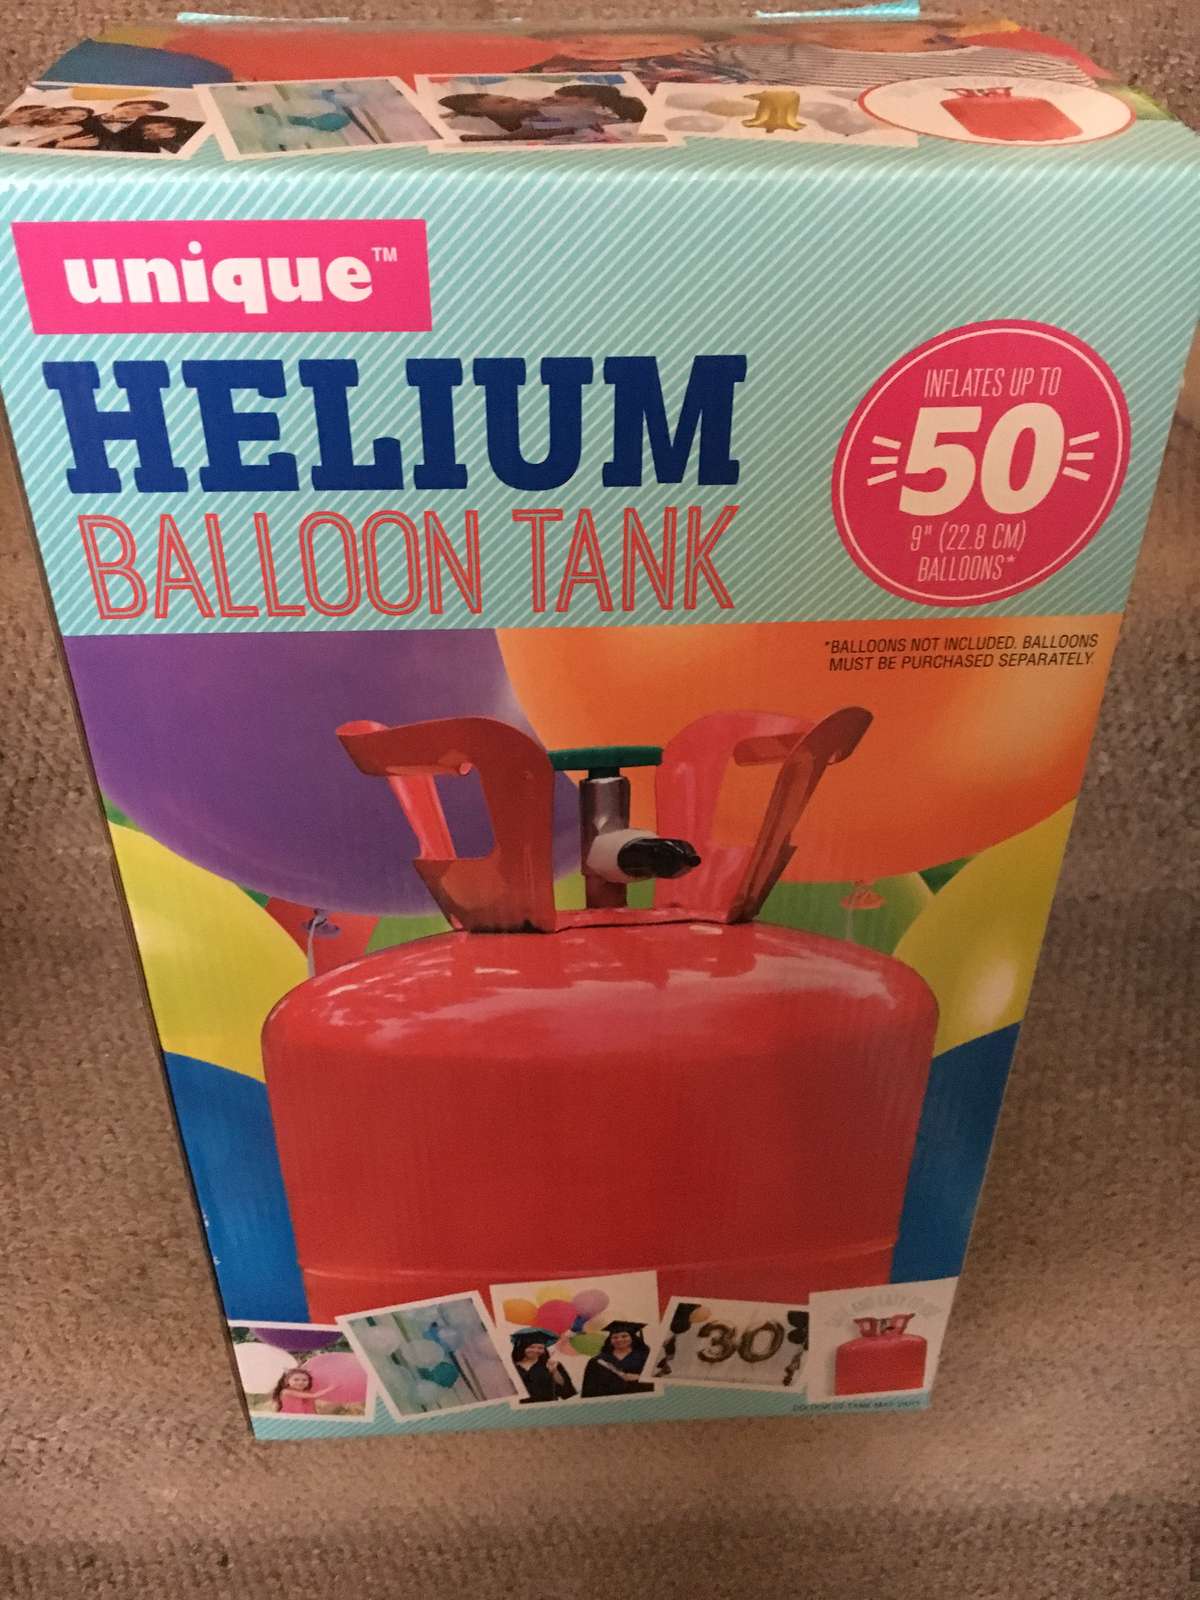 Does Asda Fill Helium Balloons In 2022? (Do This Instead...)